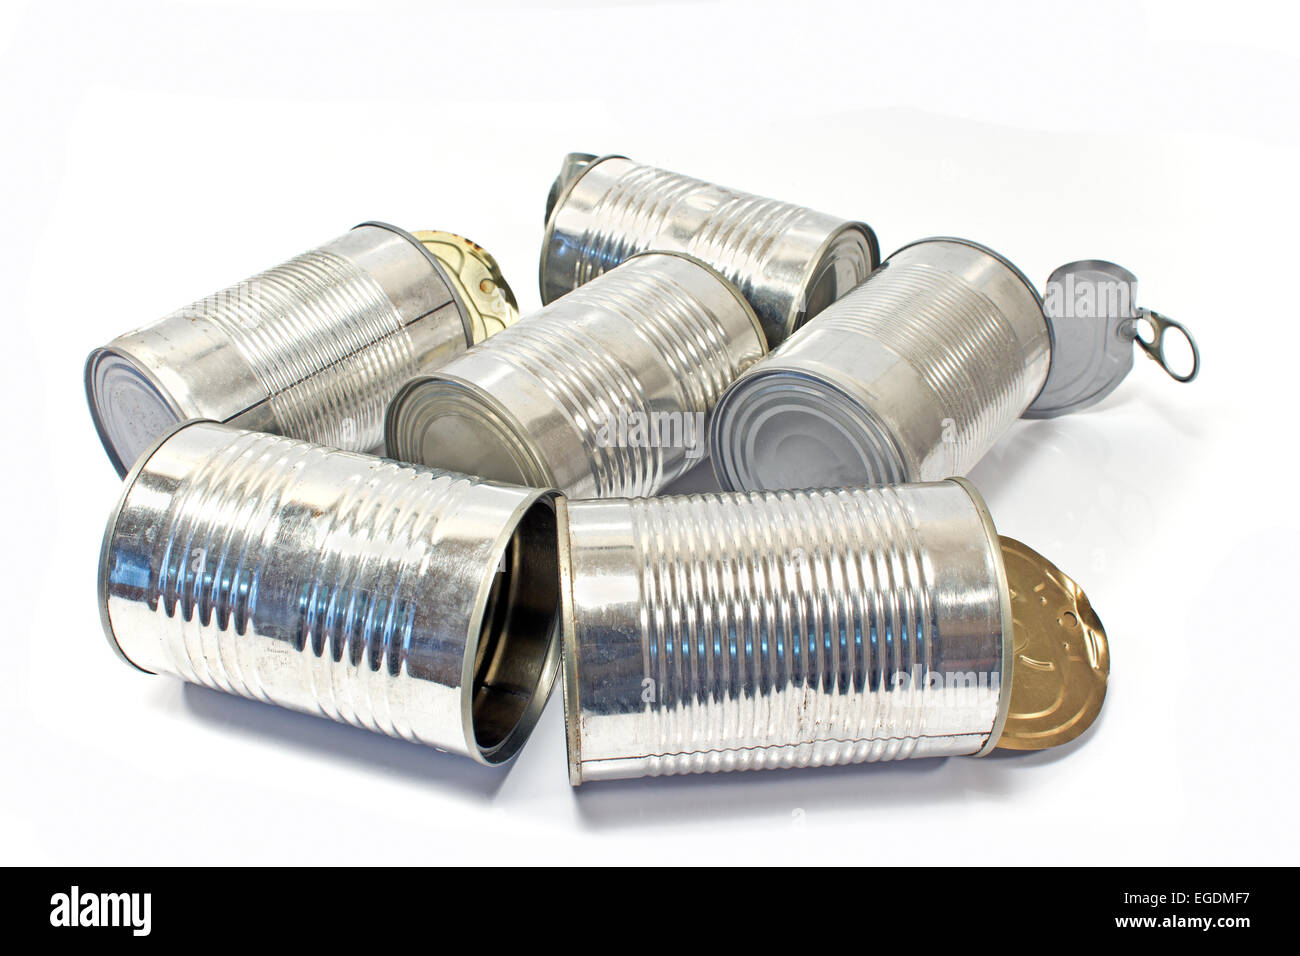 Pile of used cans over white background Stock Photo